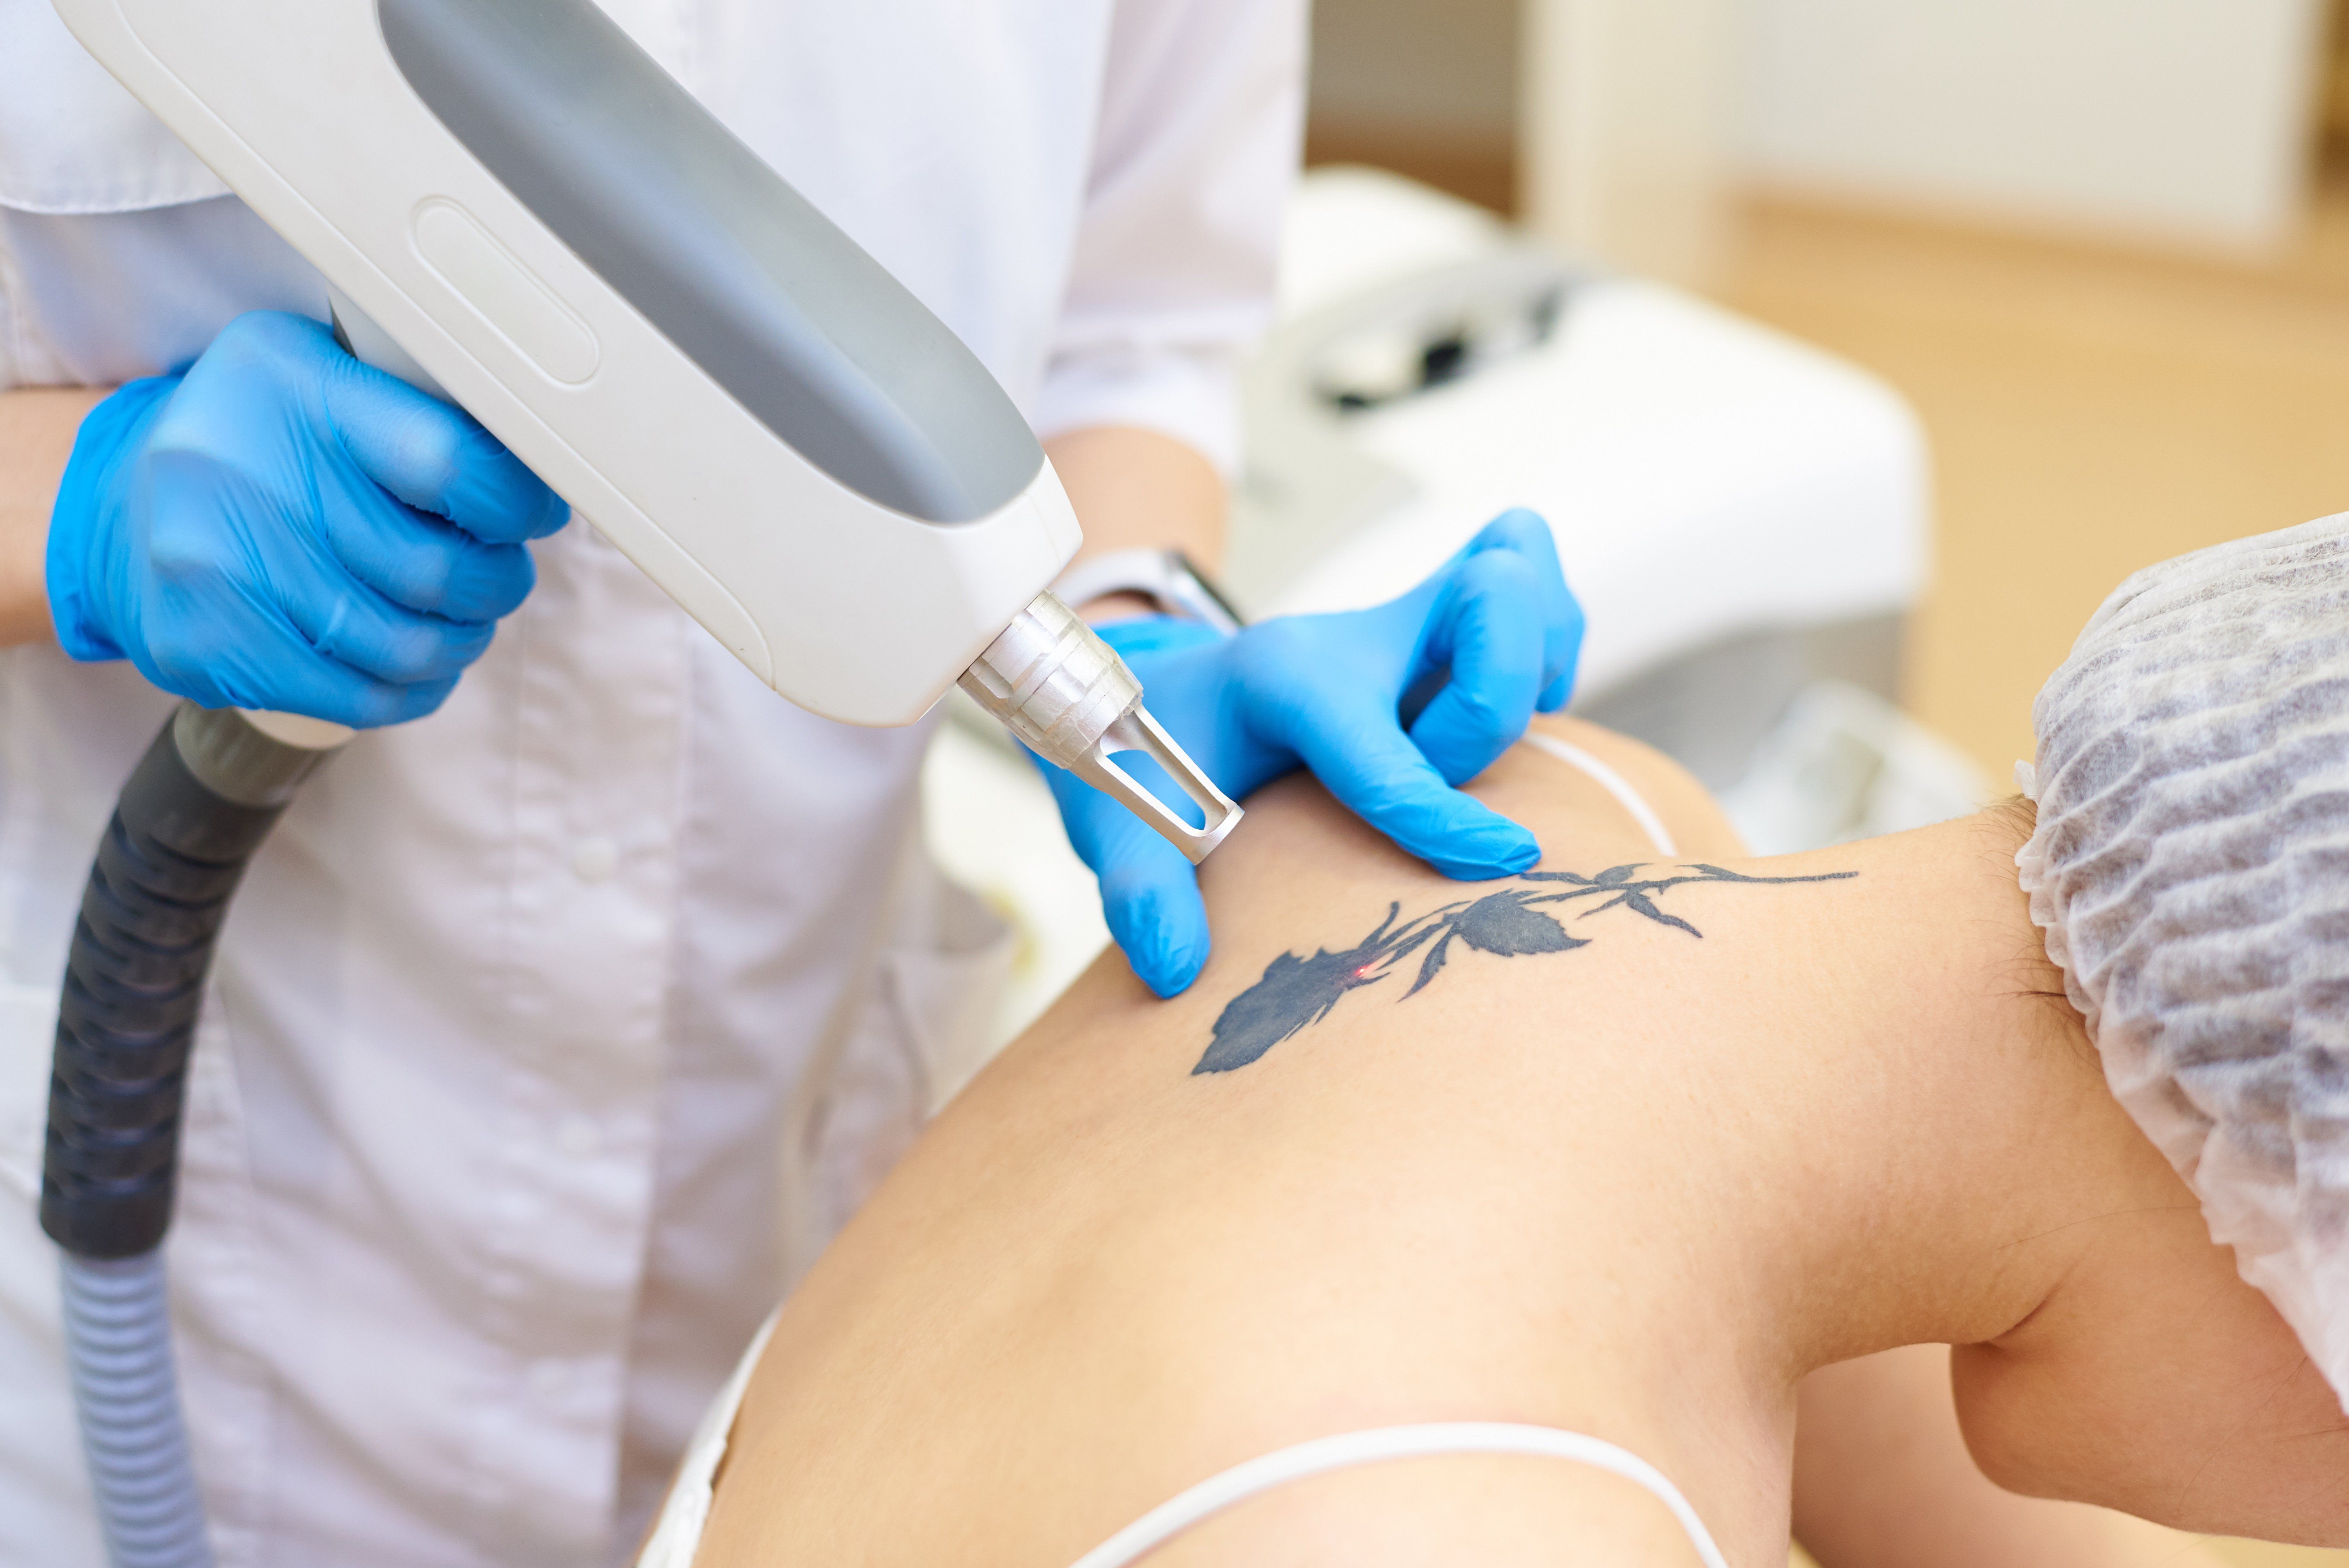 How Many Tattoo Removal Sessions Do You Need Based on Size?